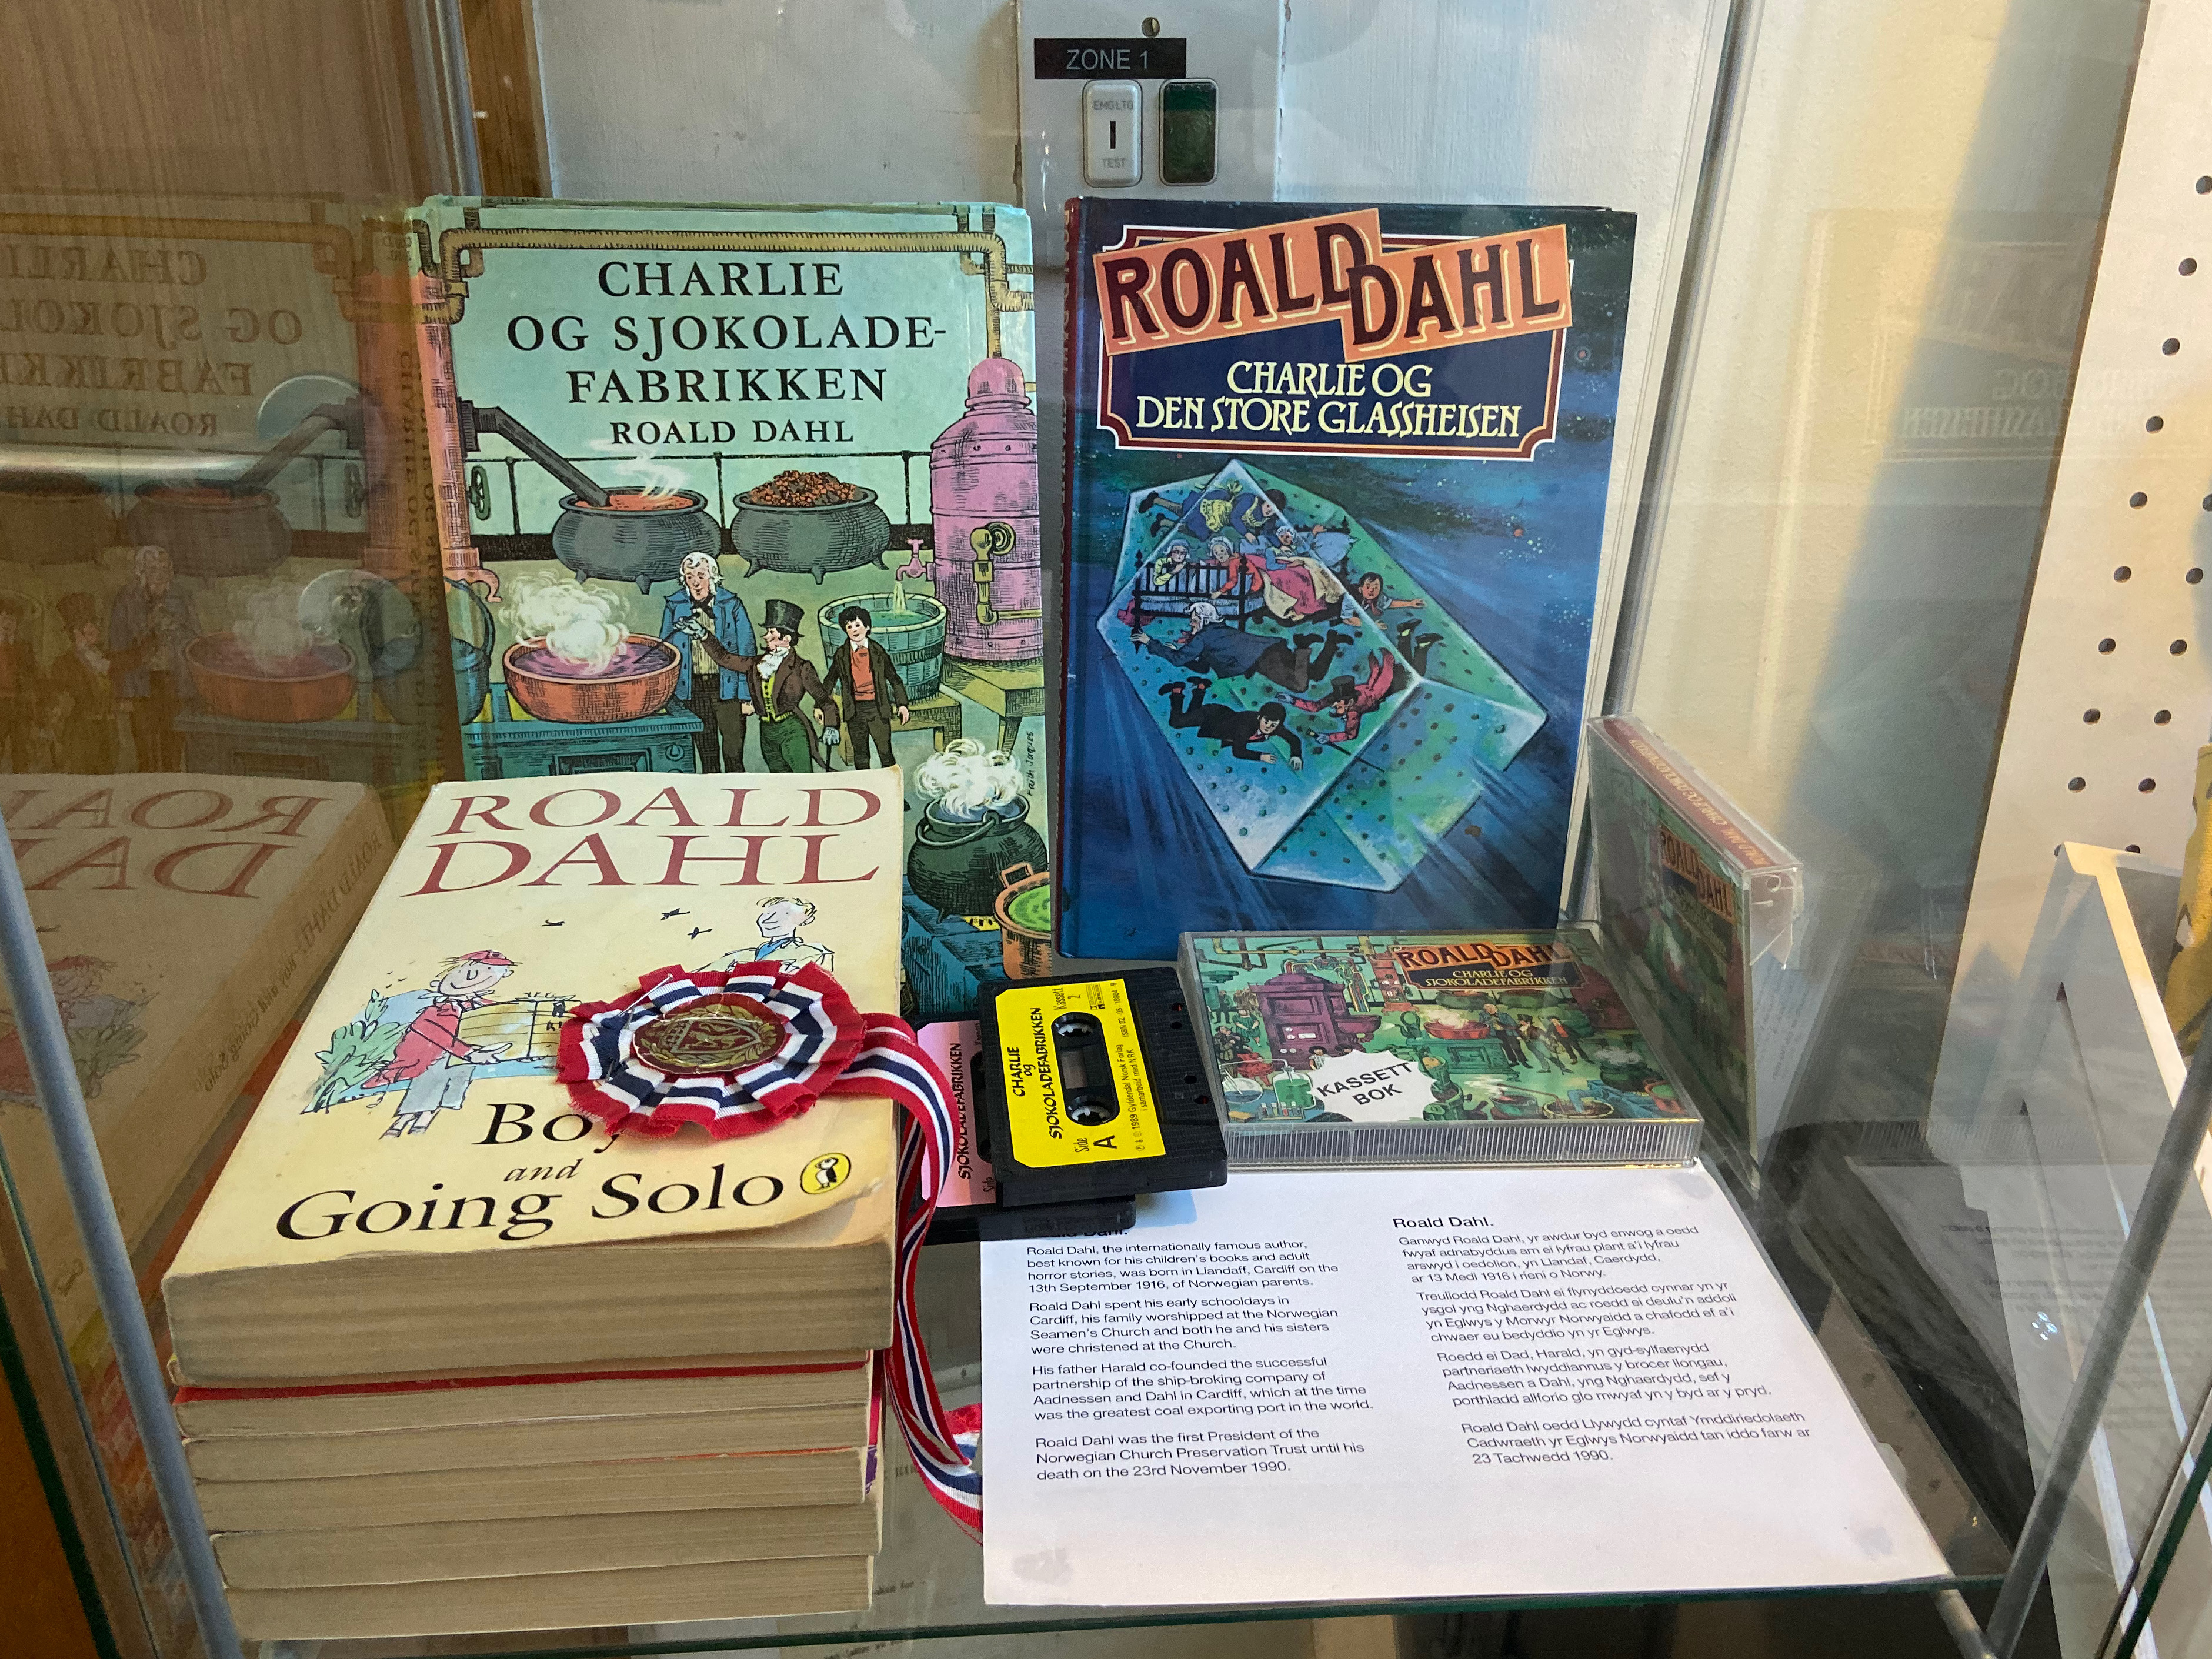 A collection of Roald Dahl's work in both English and Norwegian is displayed in a glass cabinet 